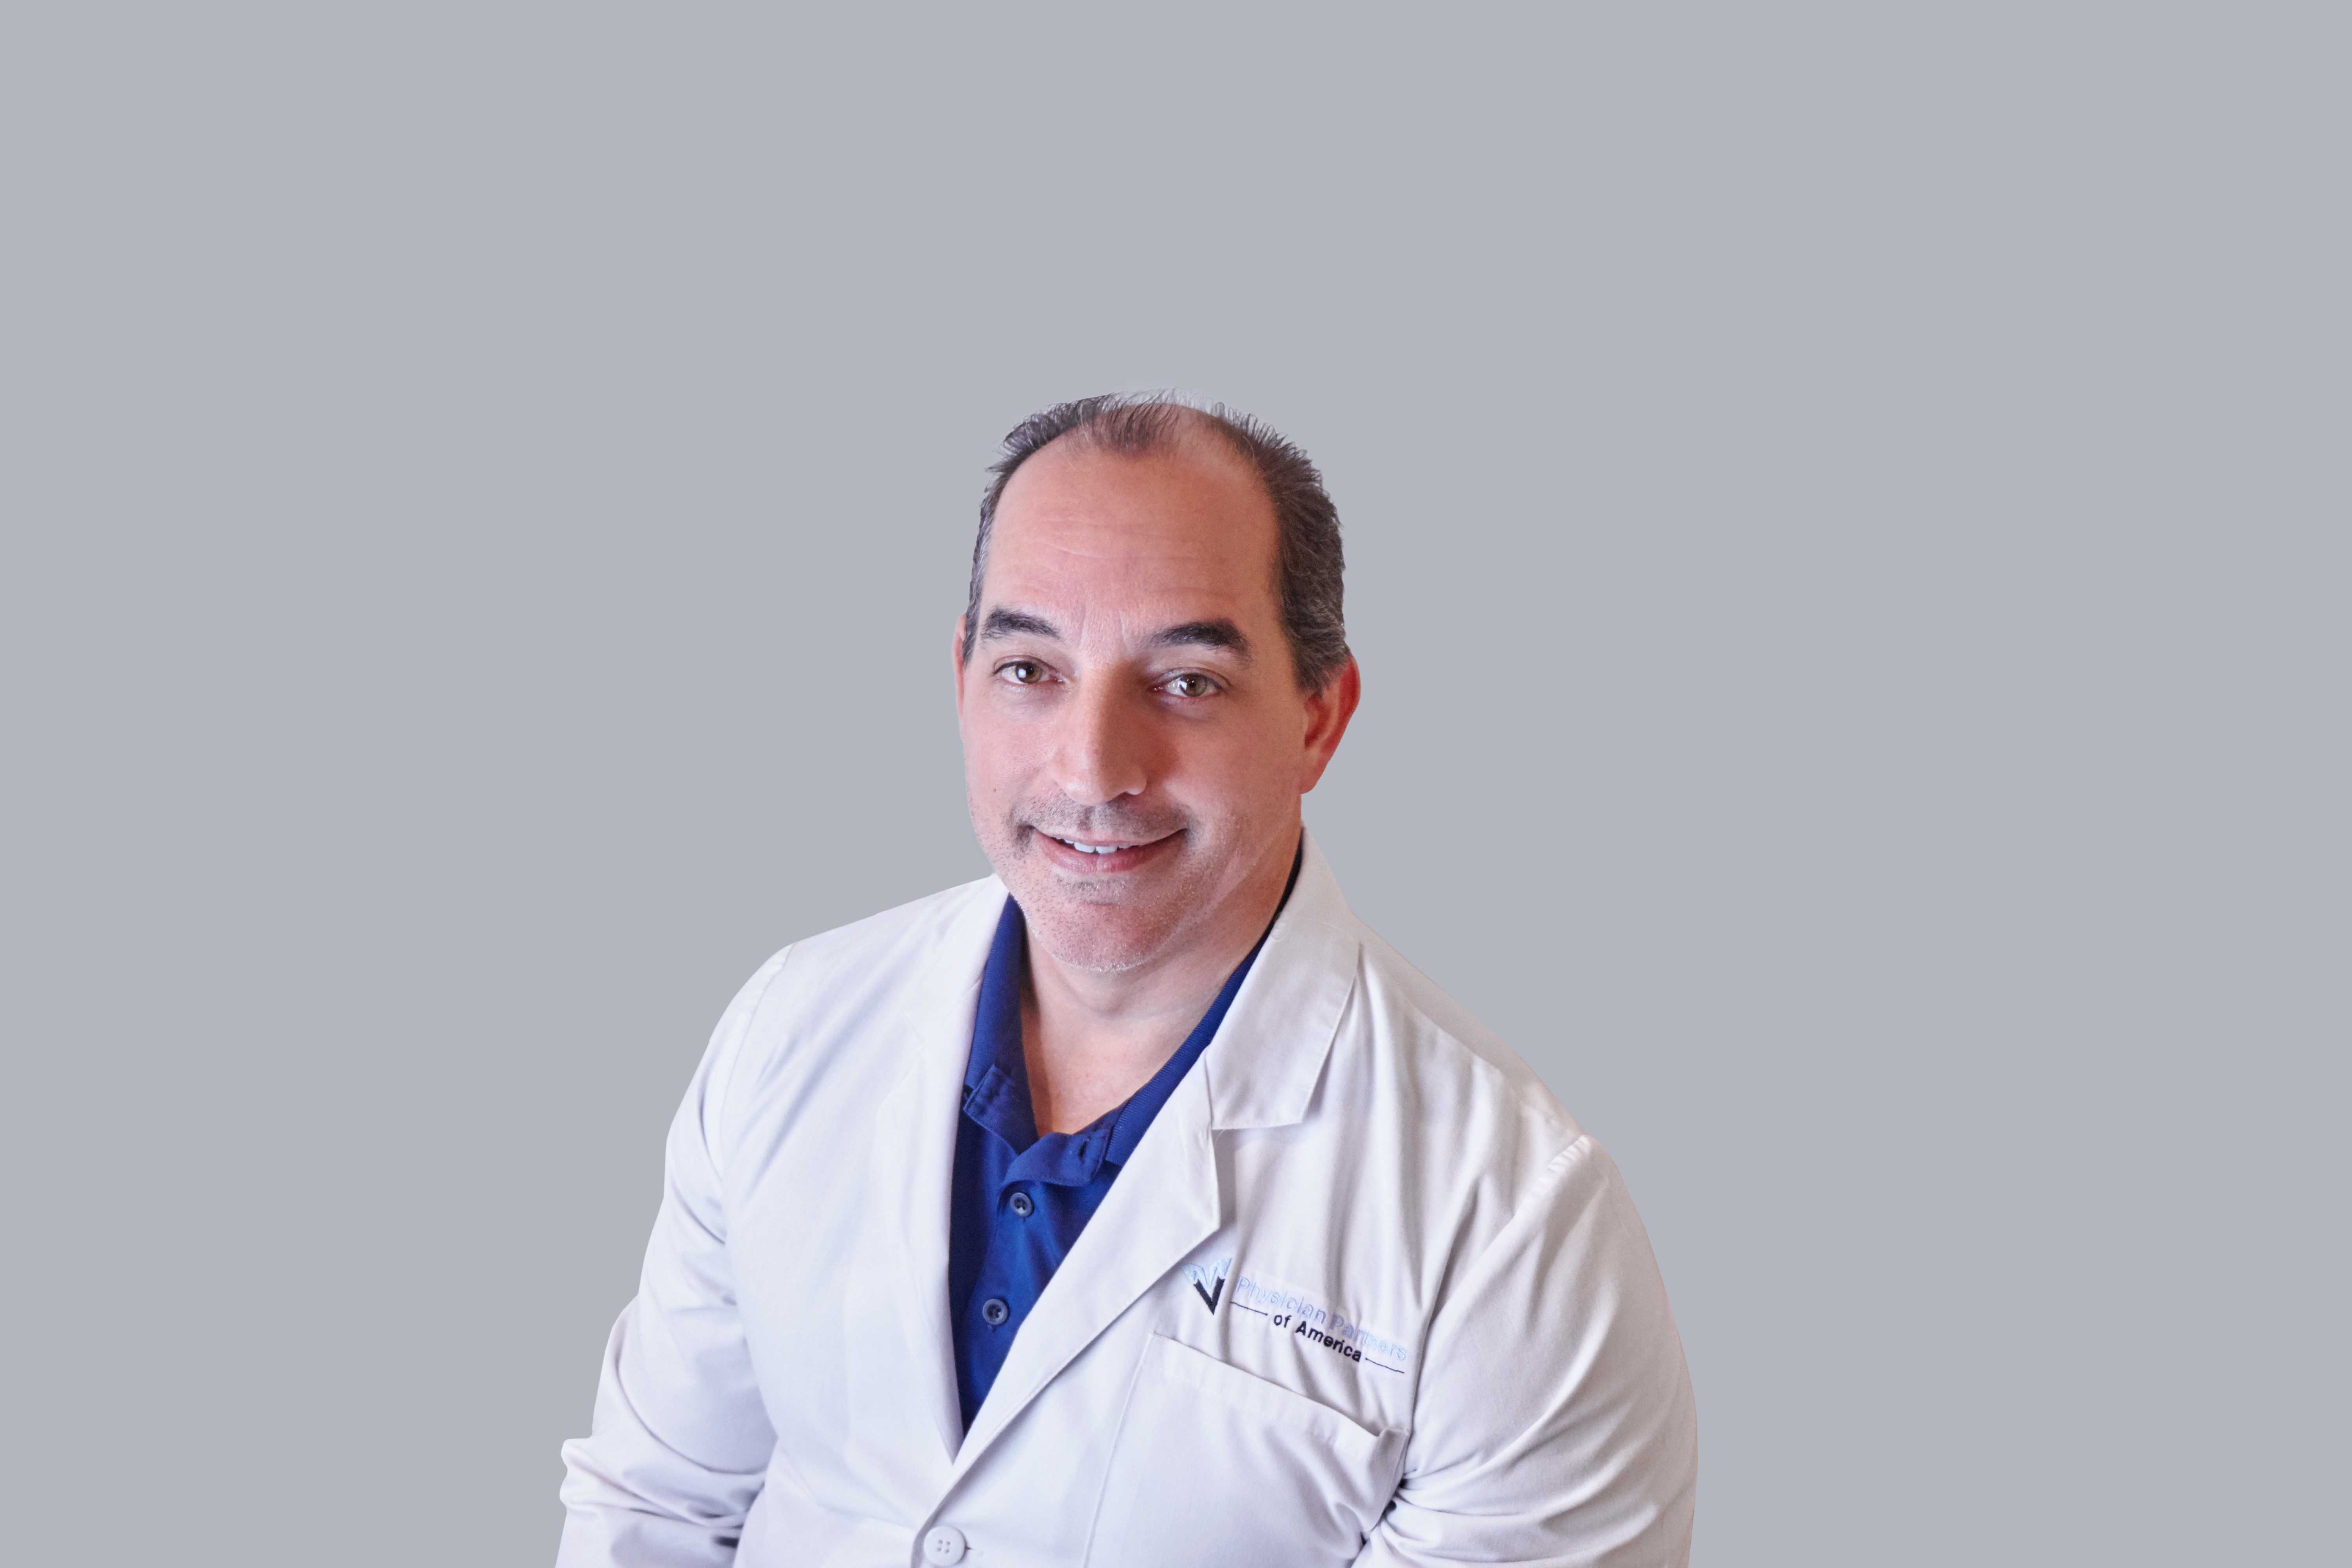 Dr. Alejandro Tapia performs laser spine procedures in Palm Beach County